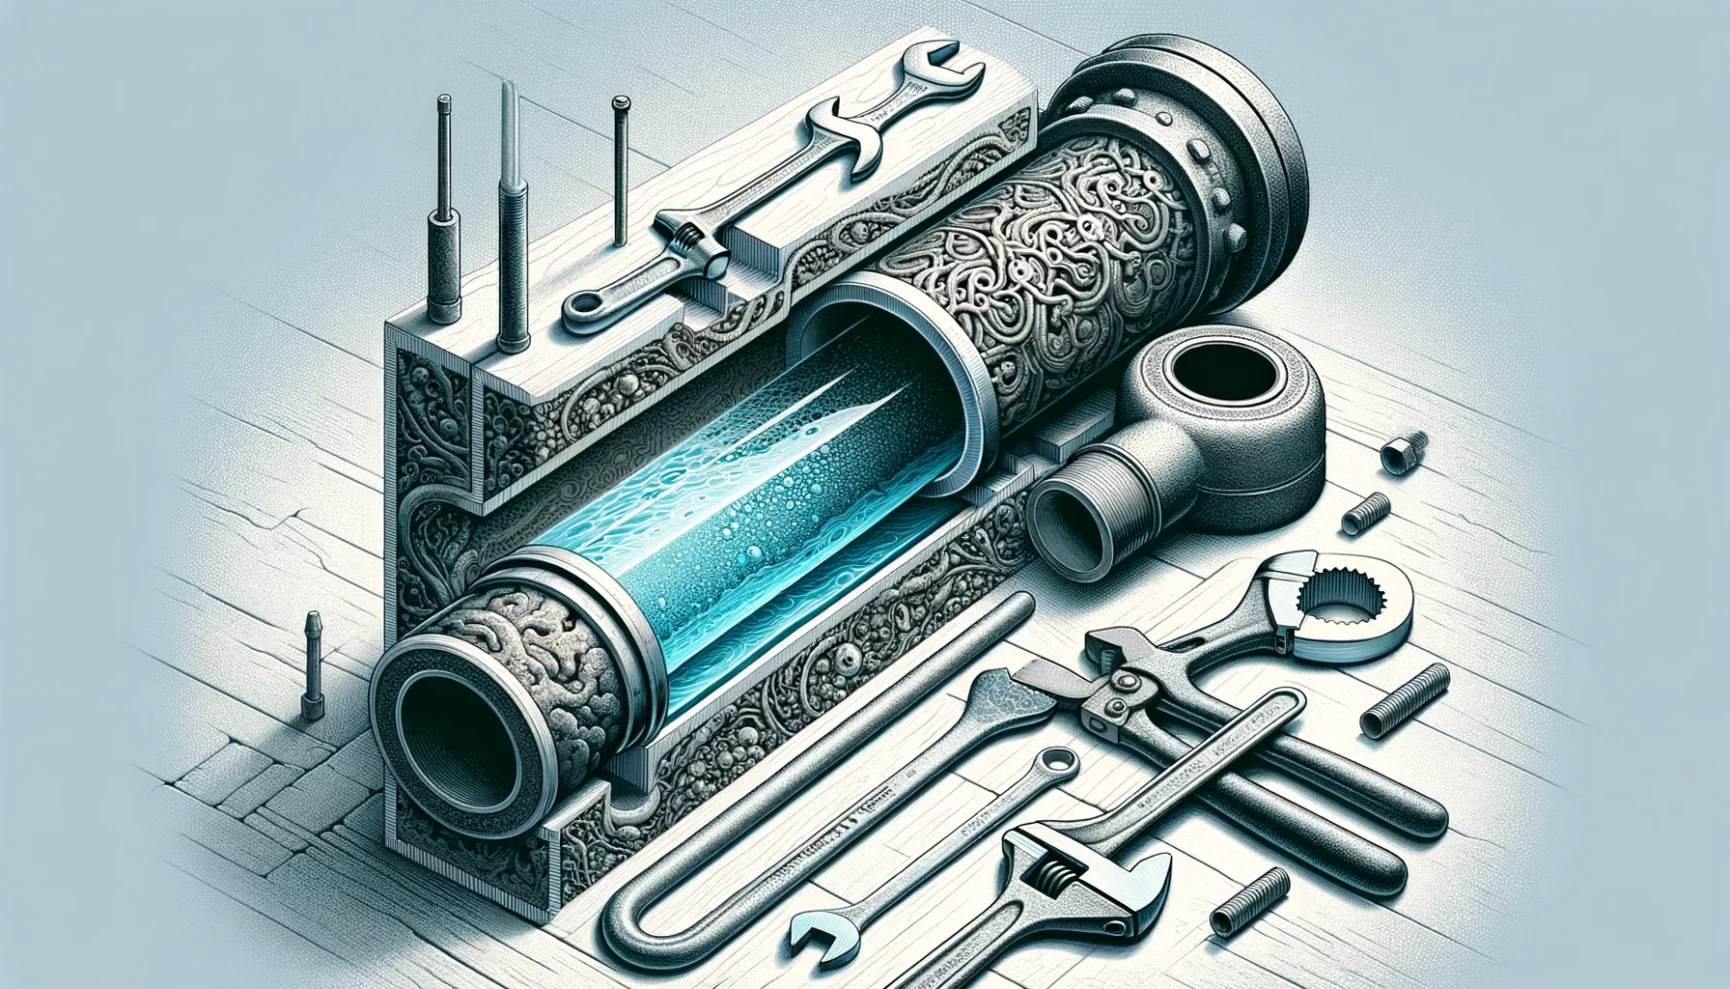 Illustration of a detailed mechanical device with a central glowing blue tube, surrounded by ornate metal parts and tools on a textured surface.